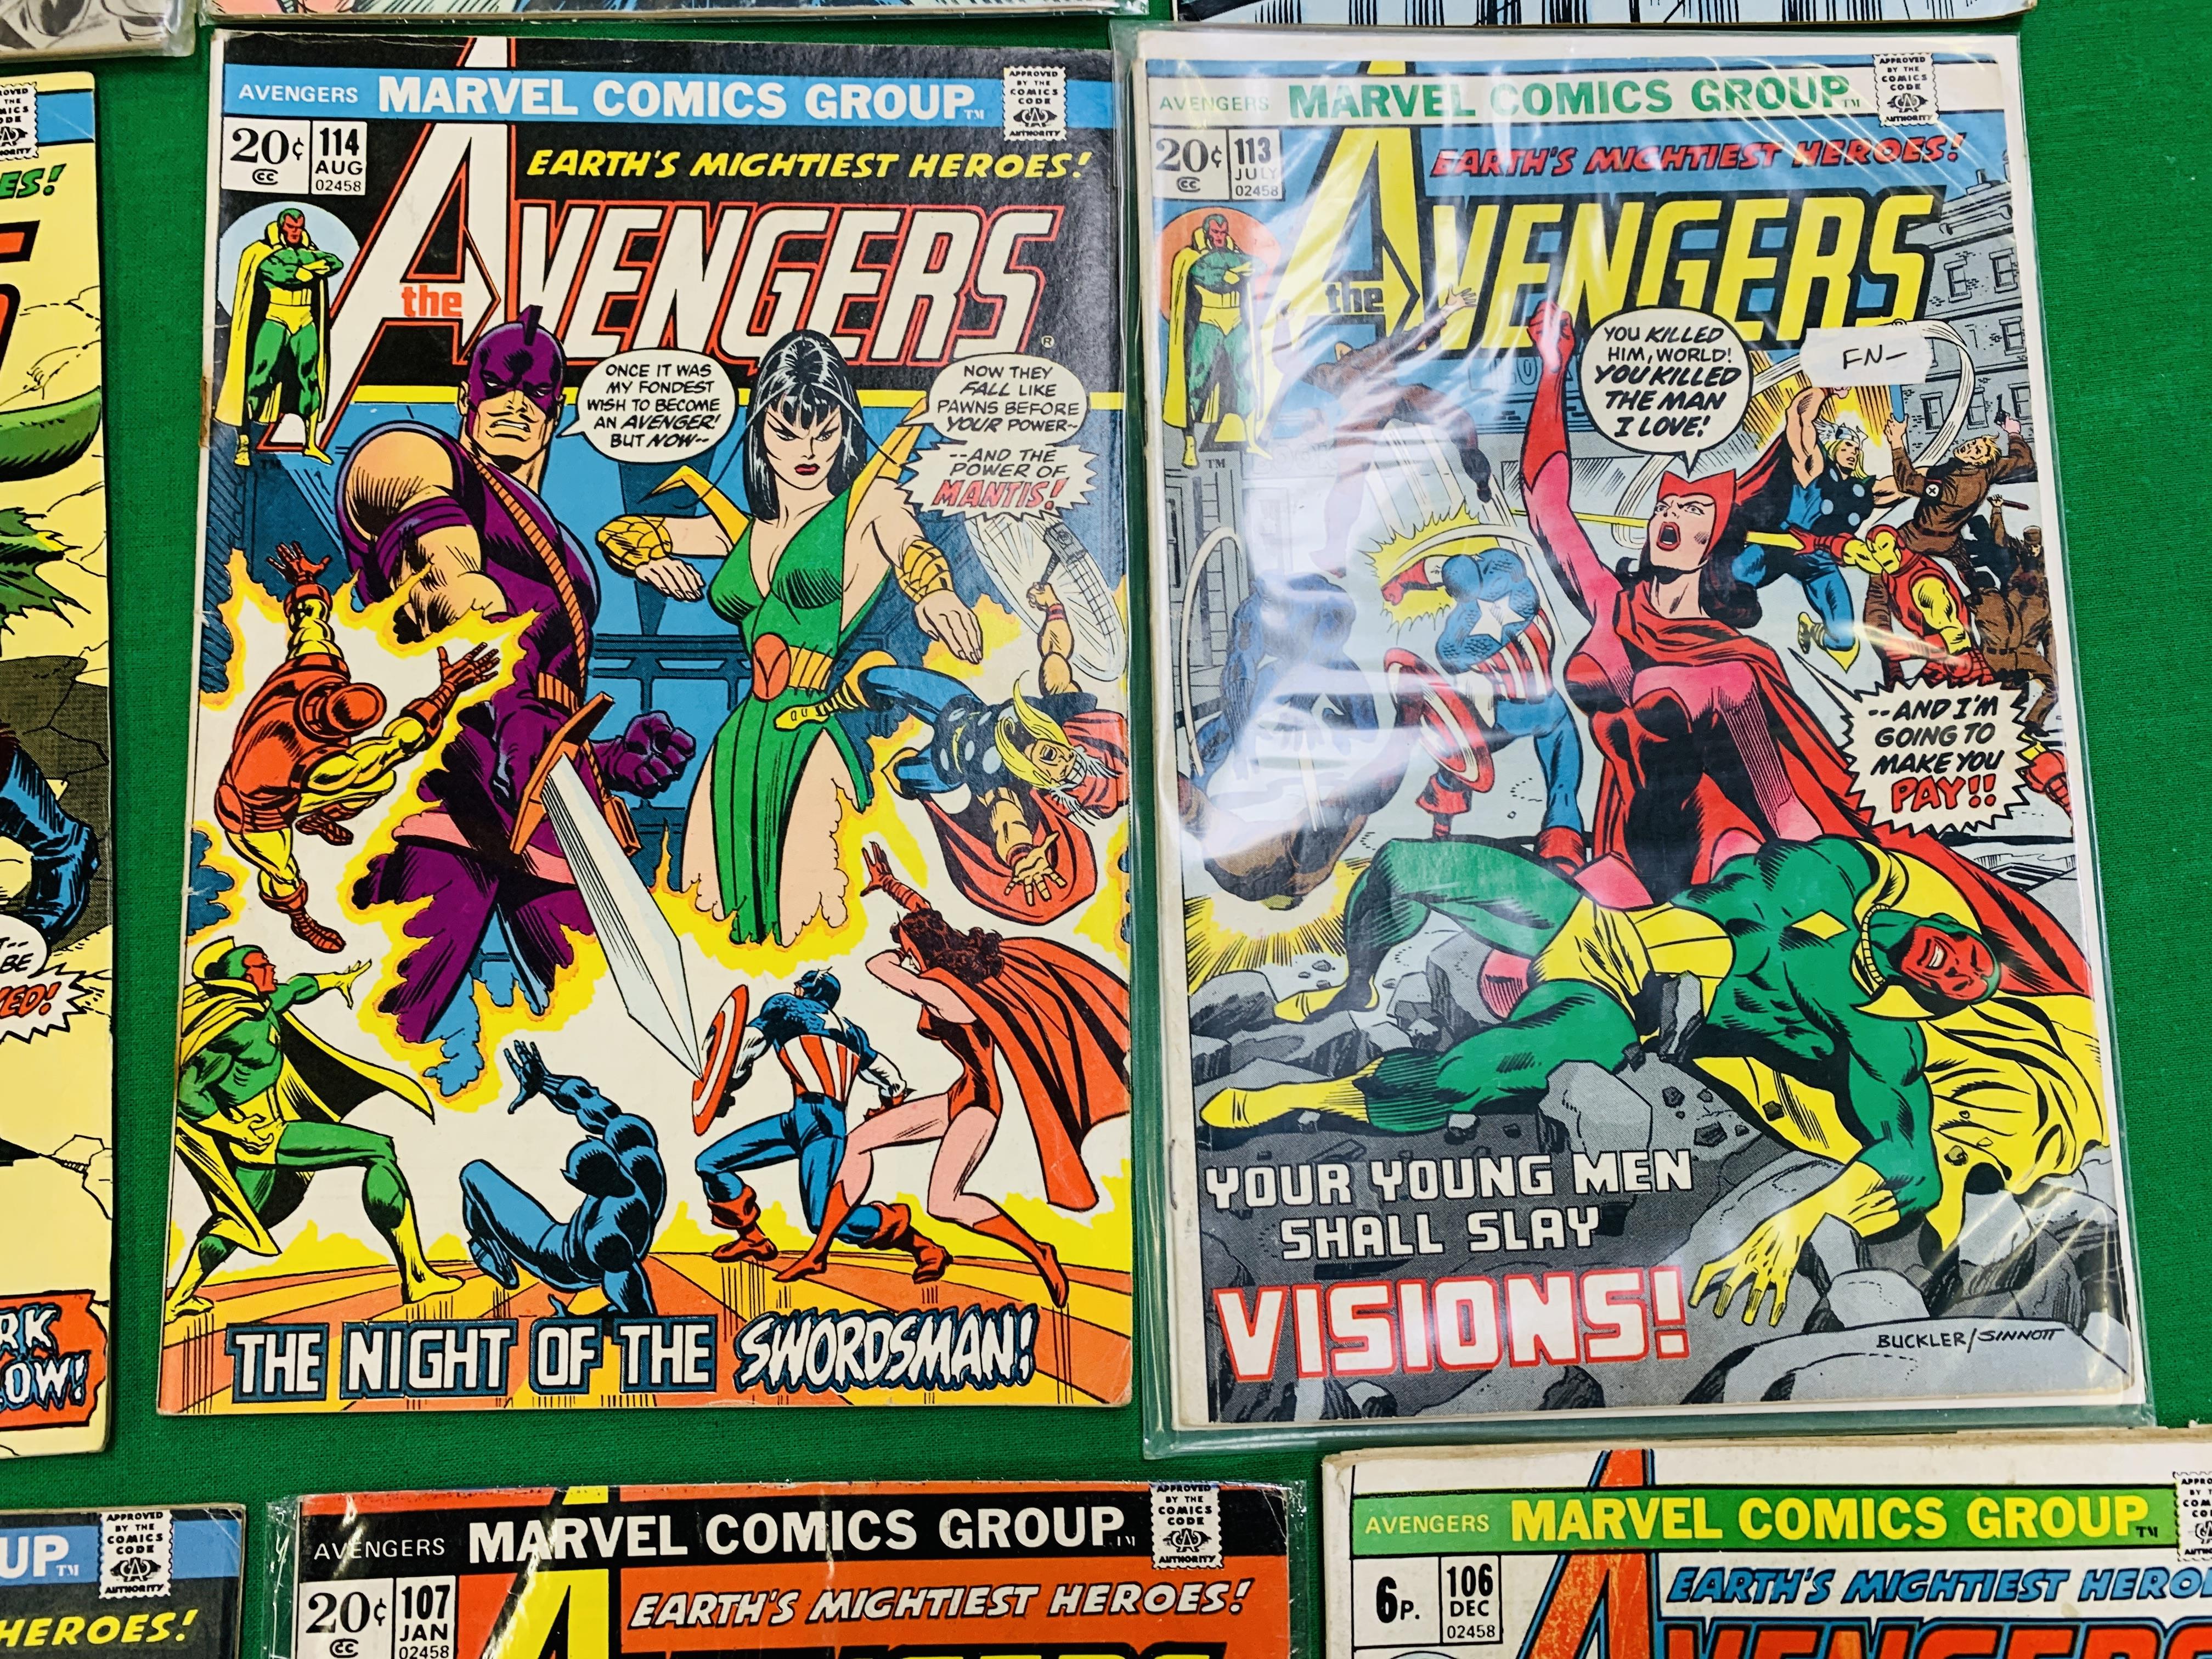 MARVEL COMICS THE AVENGERS NO. 101 - 299, MISSING ISSUES 103 AND 110. - Image 9 of 130